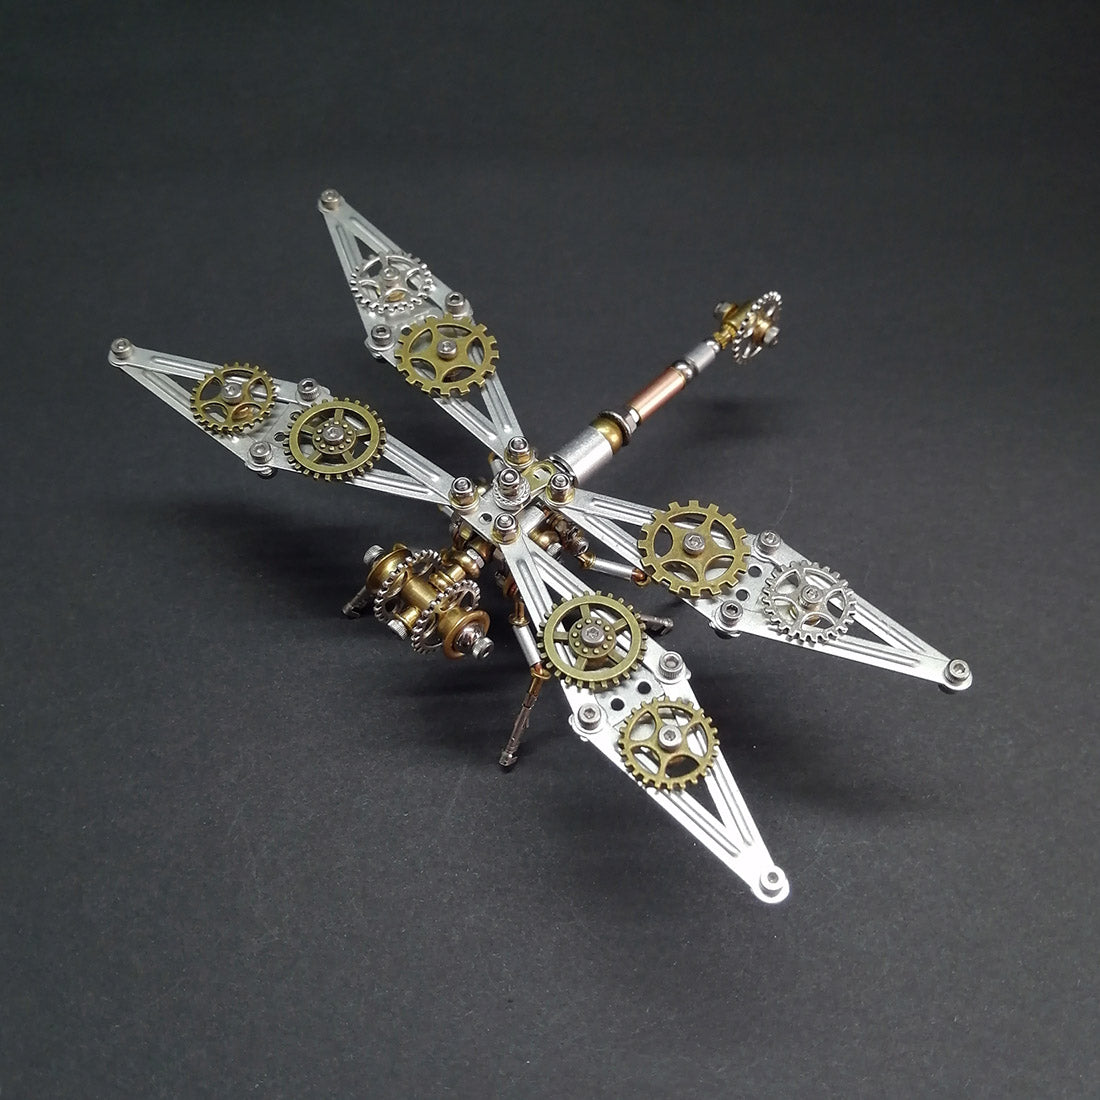 3D Metal Puzzle Dragonfly Punk Insect Assembly Model 200+PCS